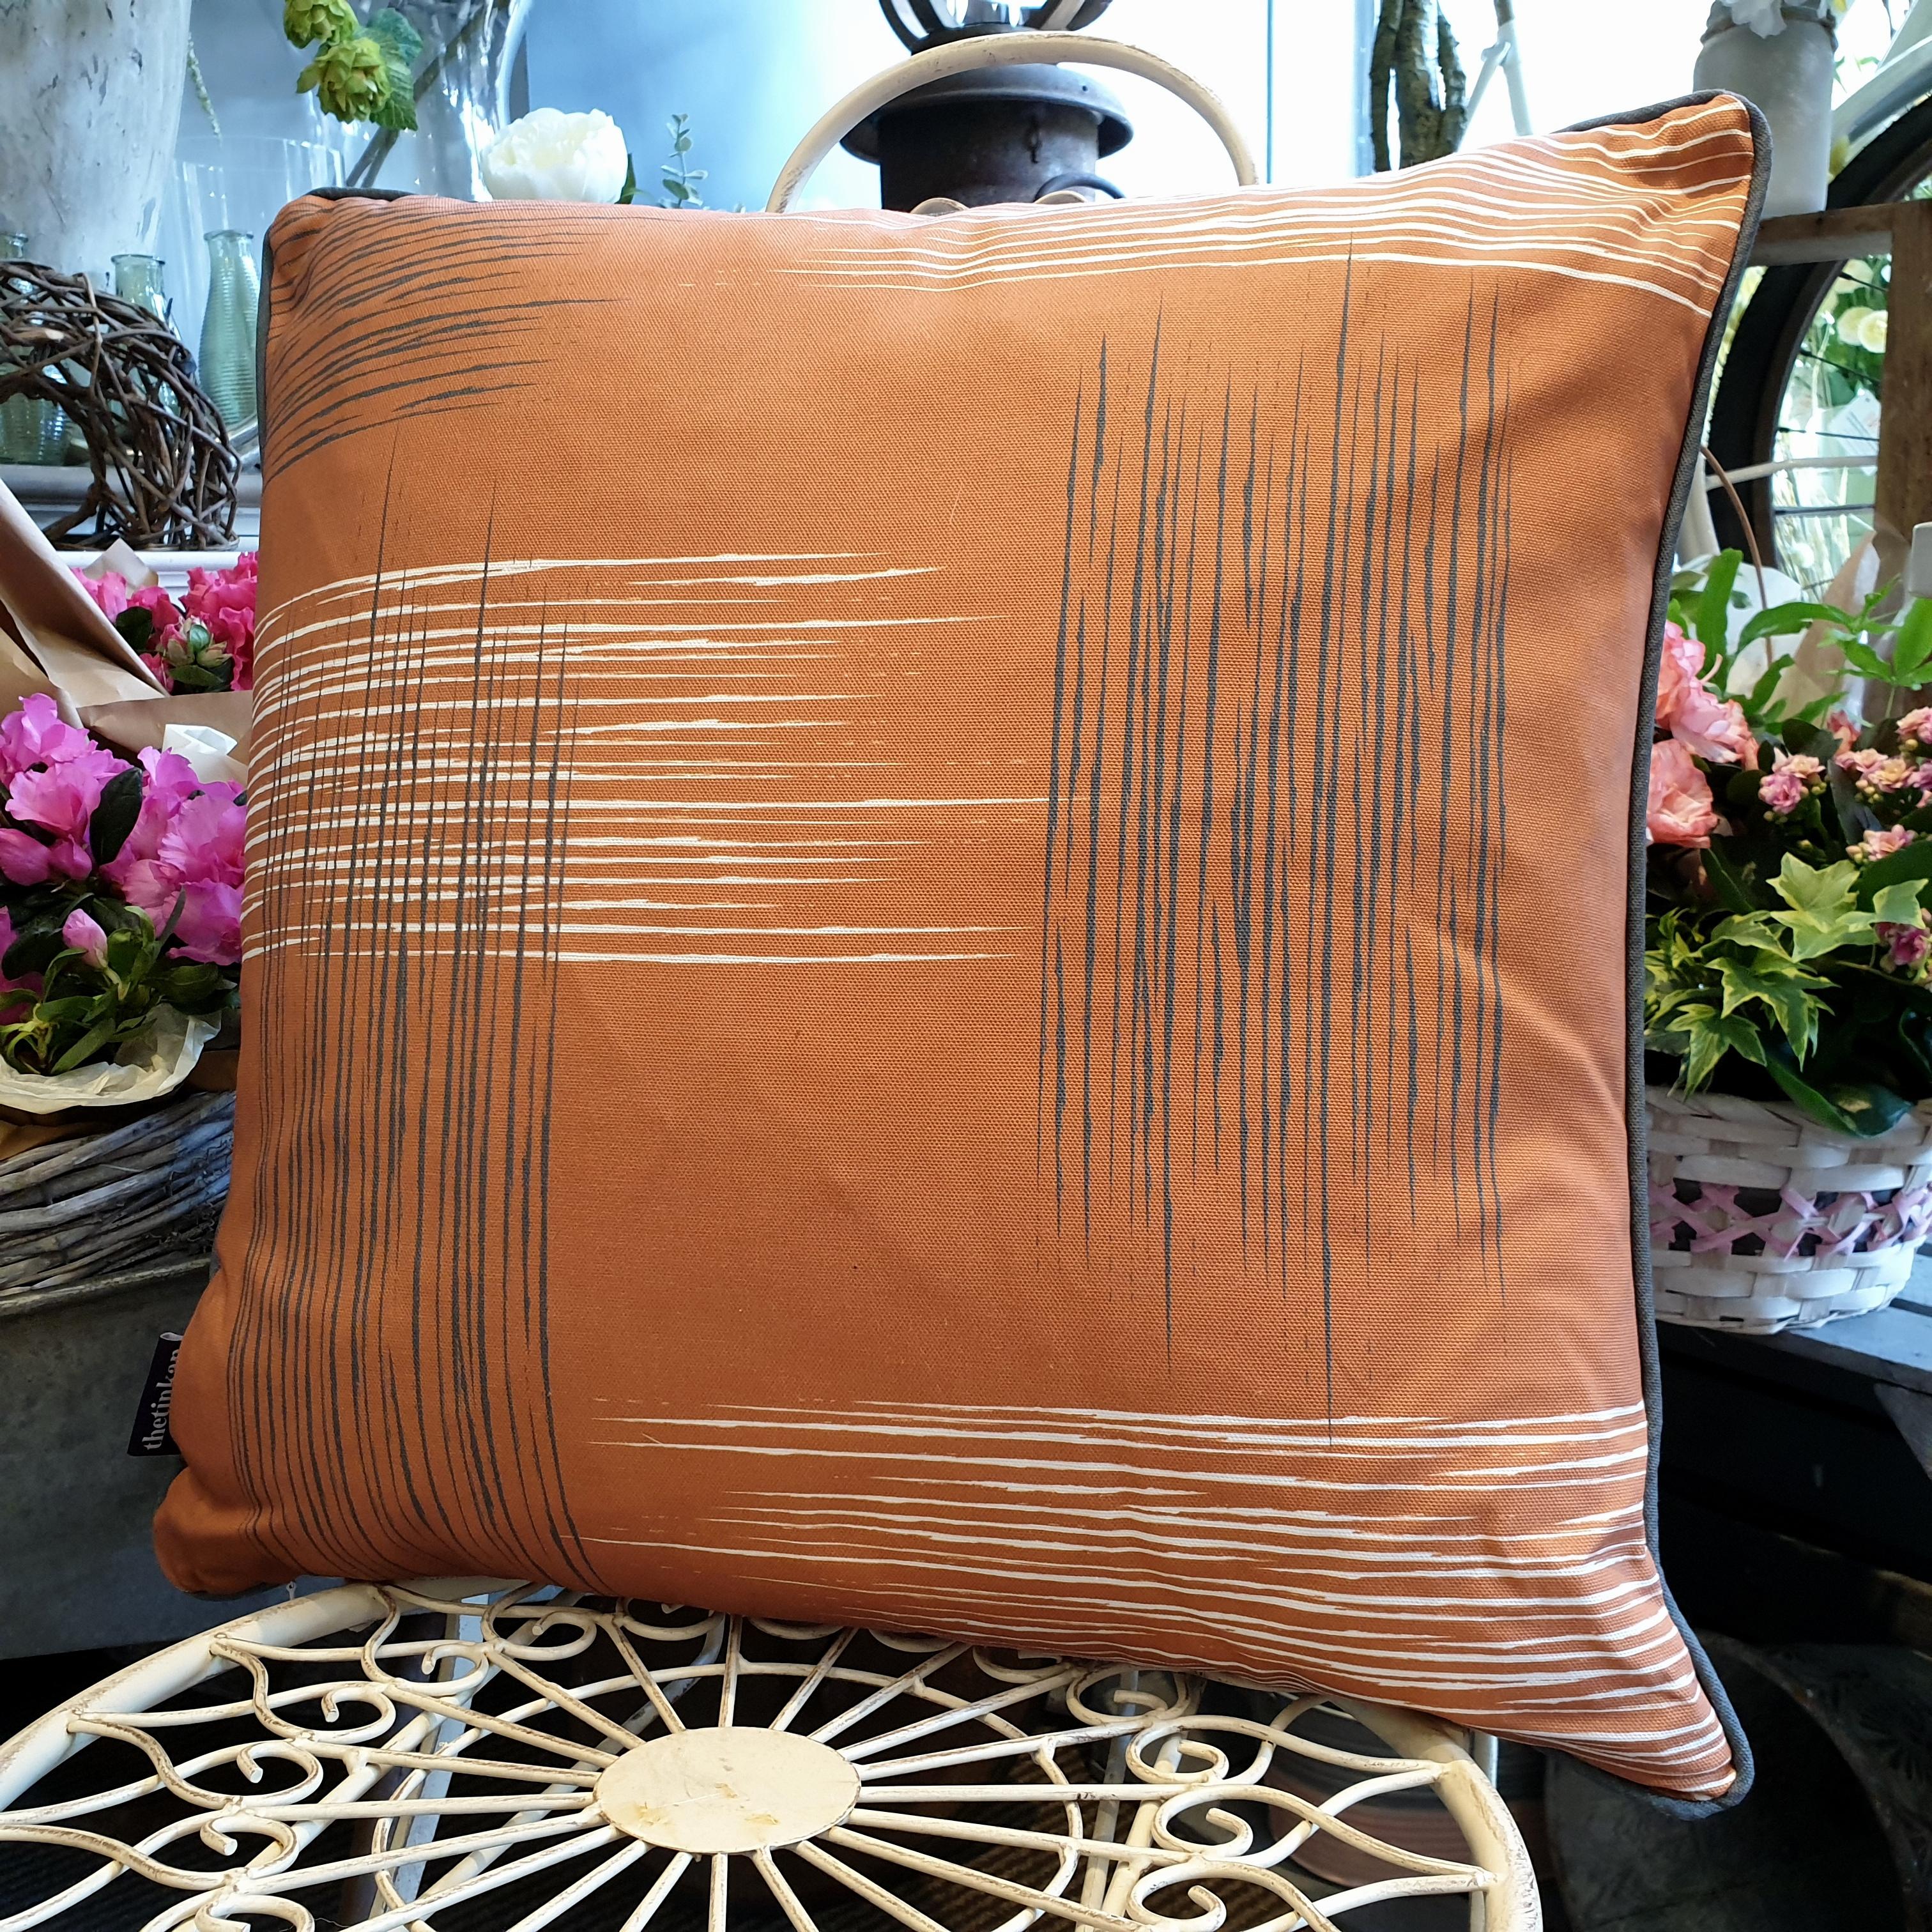 Double-sided warm rust orange 51cm square retro themed cushion with artistic grey and white shards and grey handcrafted piping designed by thetinkan. Available with an optional luxury cushion inner pad. VIEW PRODUCT >>